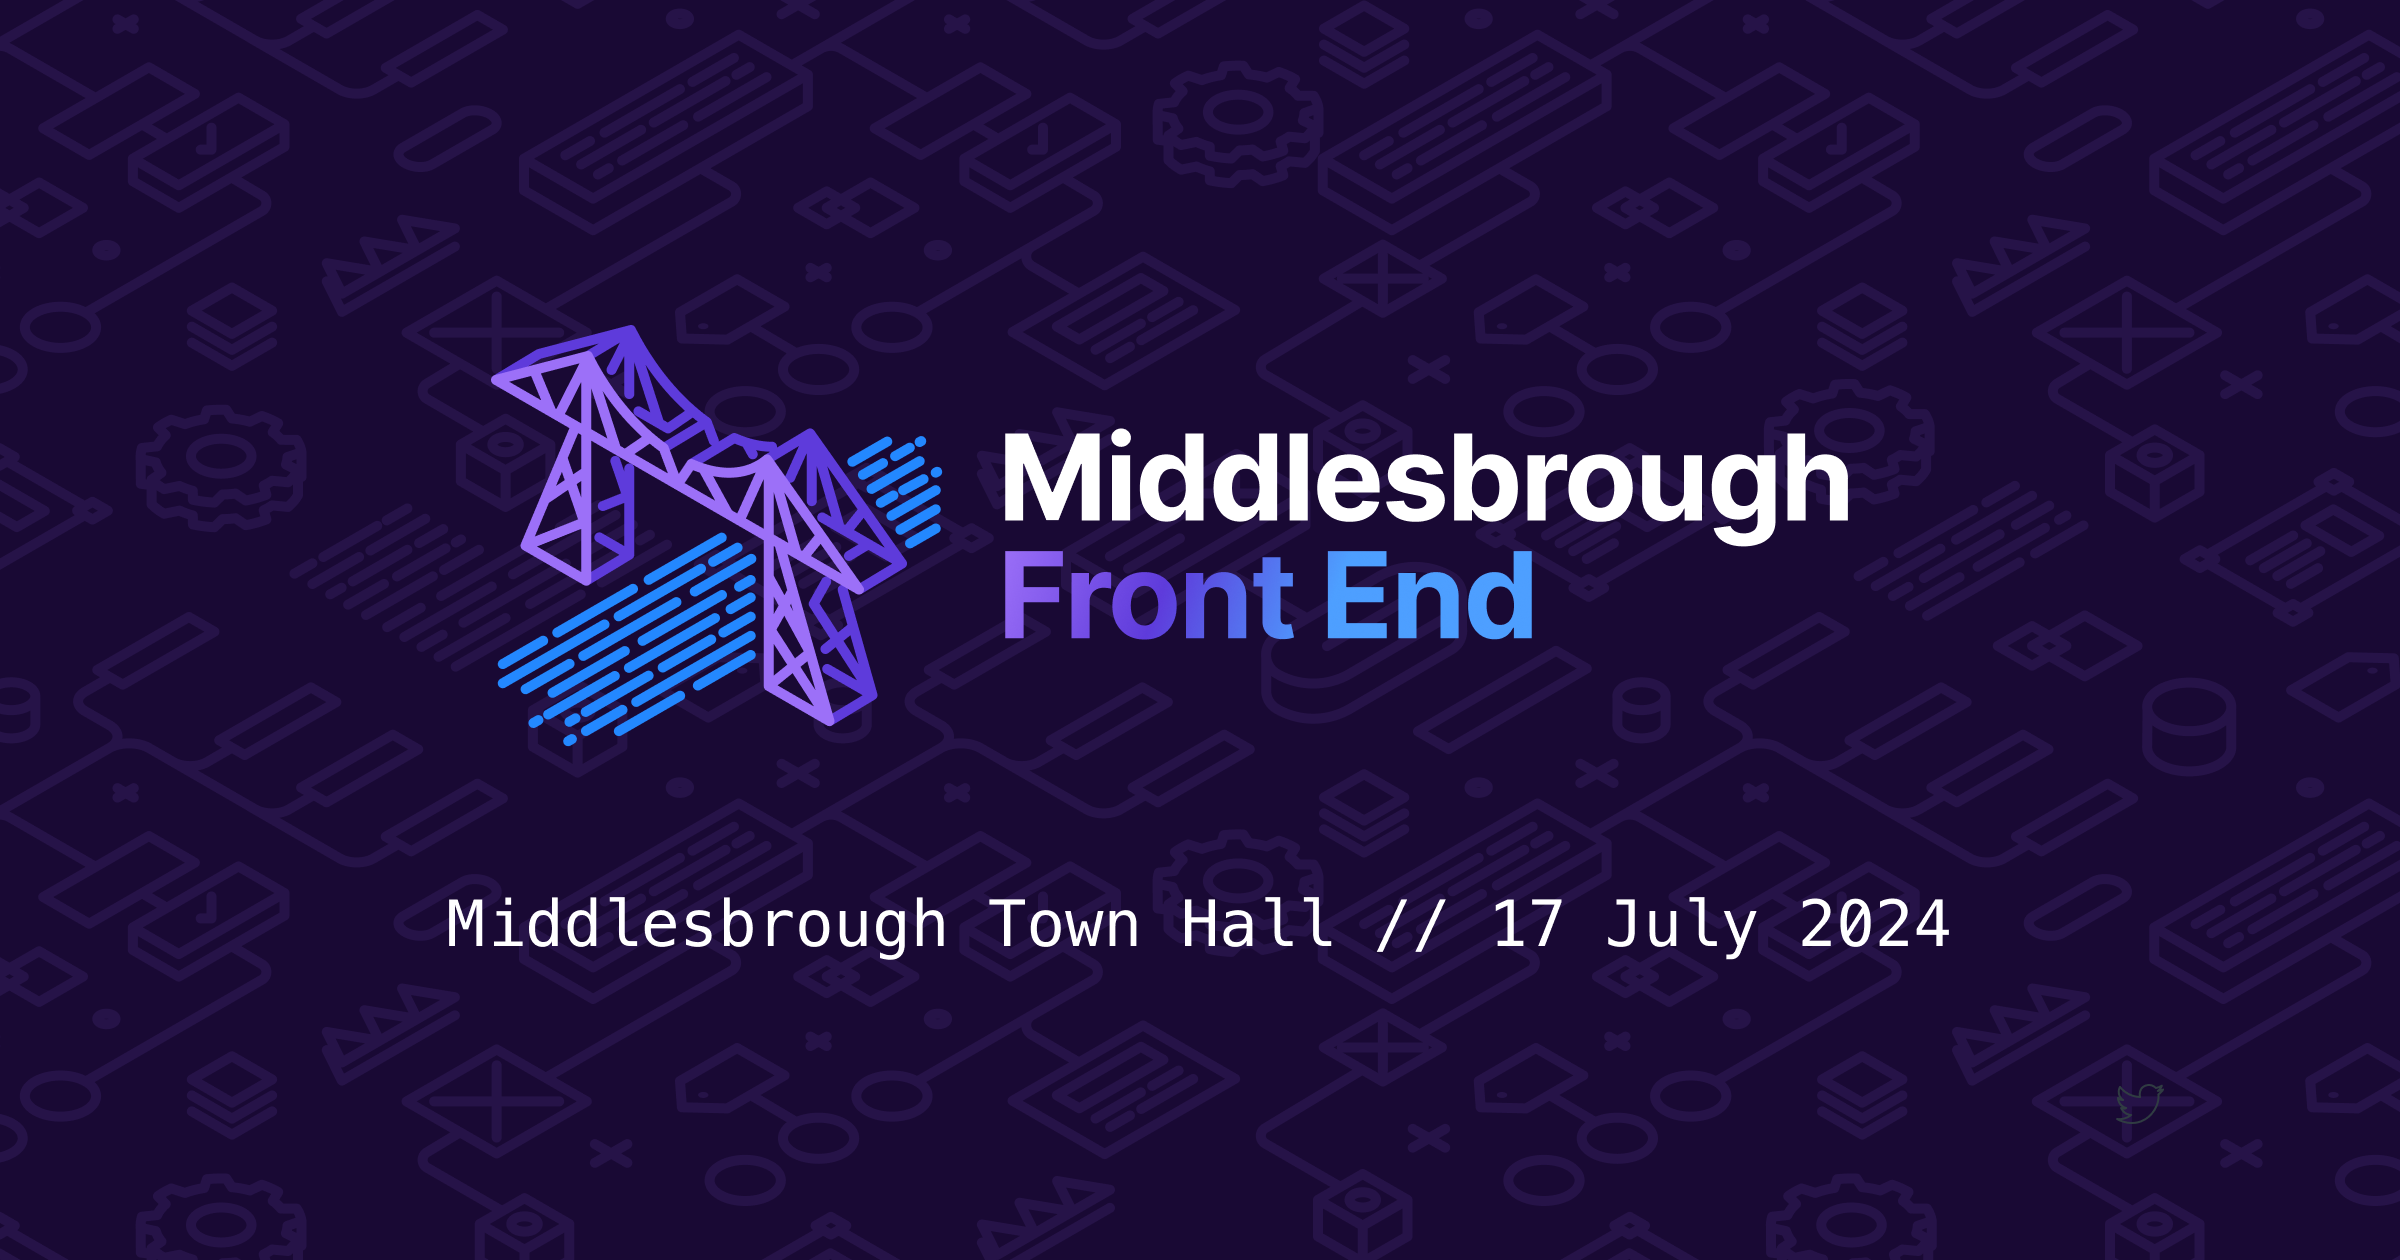 Middlesbrough Front End Conference banner with date of 17th July, 2024